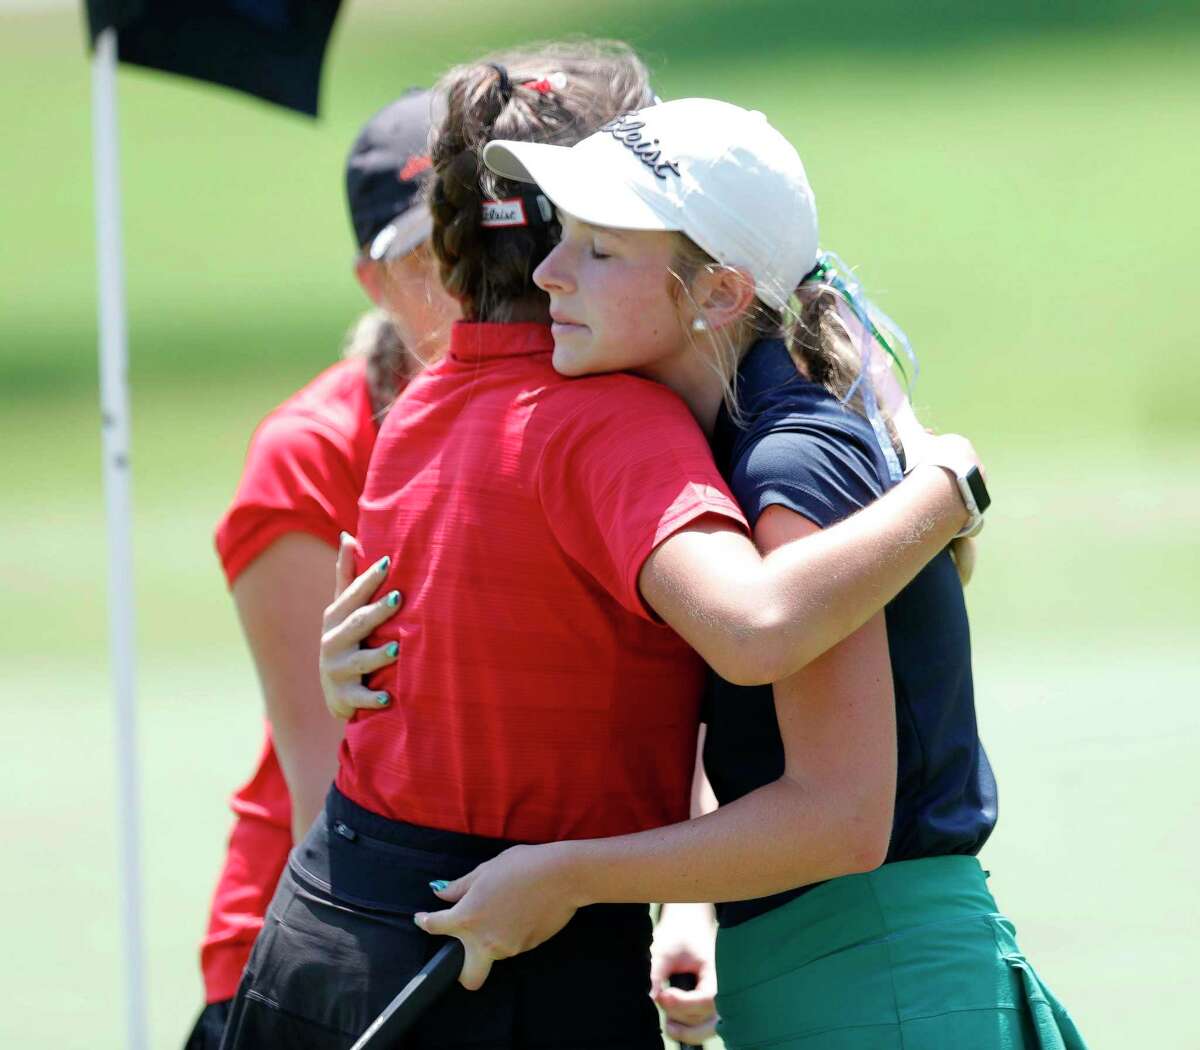 Gracie Heinle of College Park, right, hugs Veronica Expositio after finishing the final round of the Class 6A UIL State Golf Championship at Legacy Hills Golf Club, Tuesday, May 17, 2022, in Georgetown.